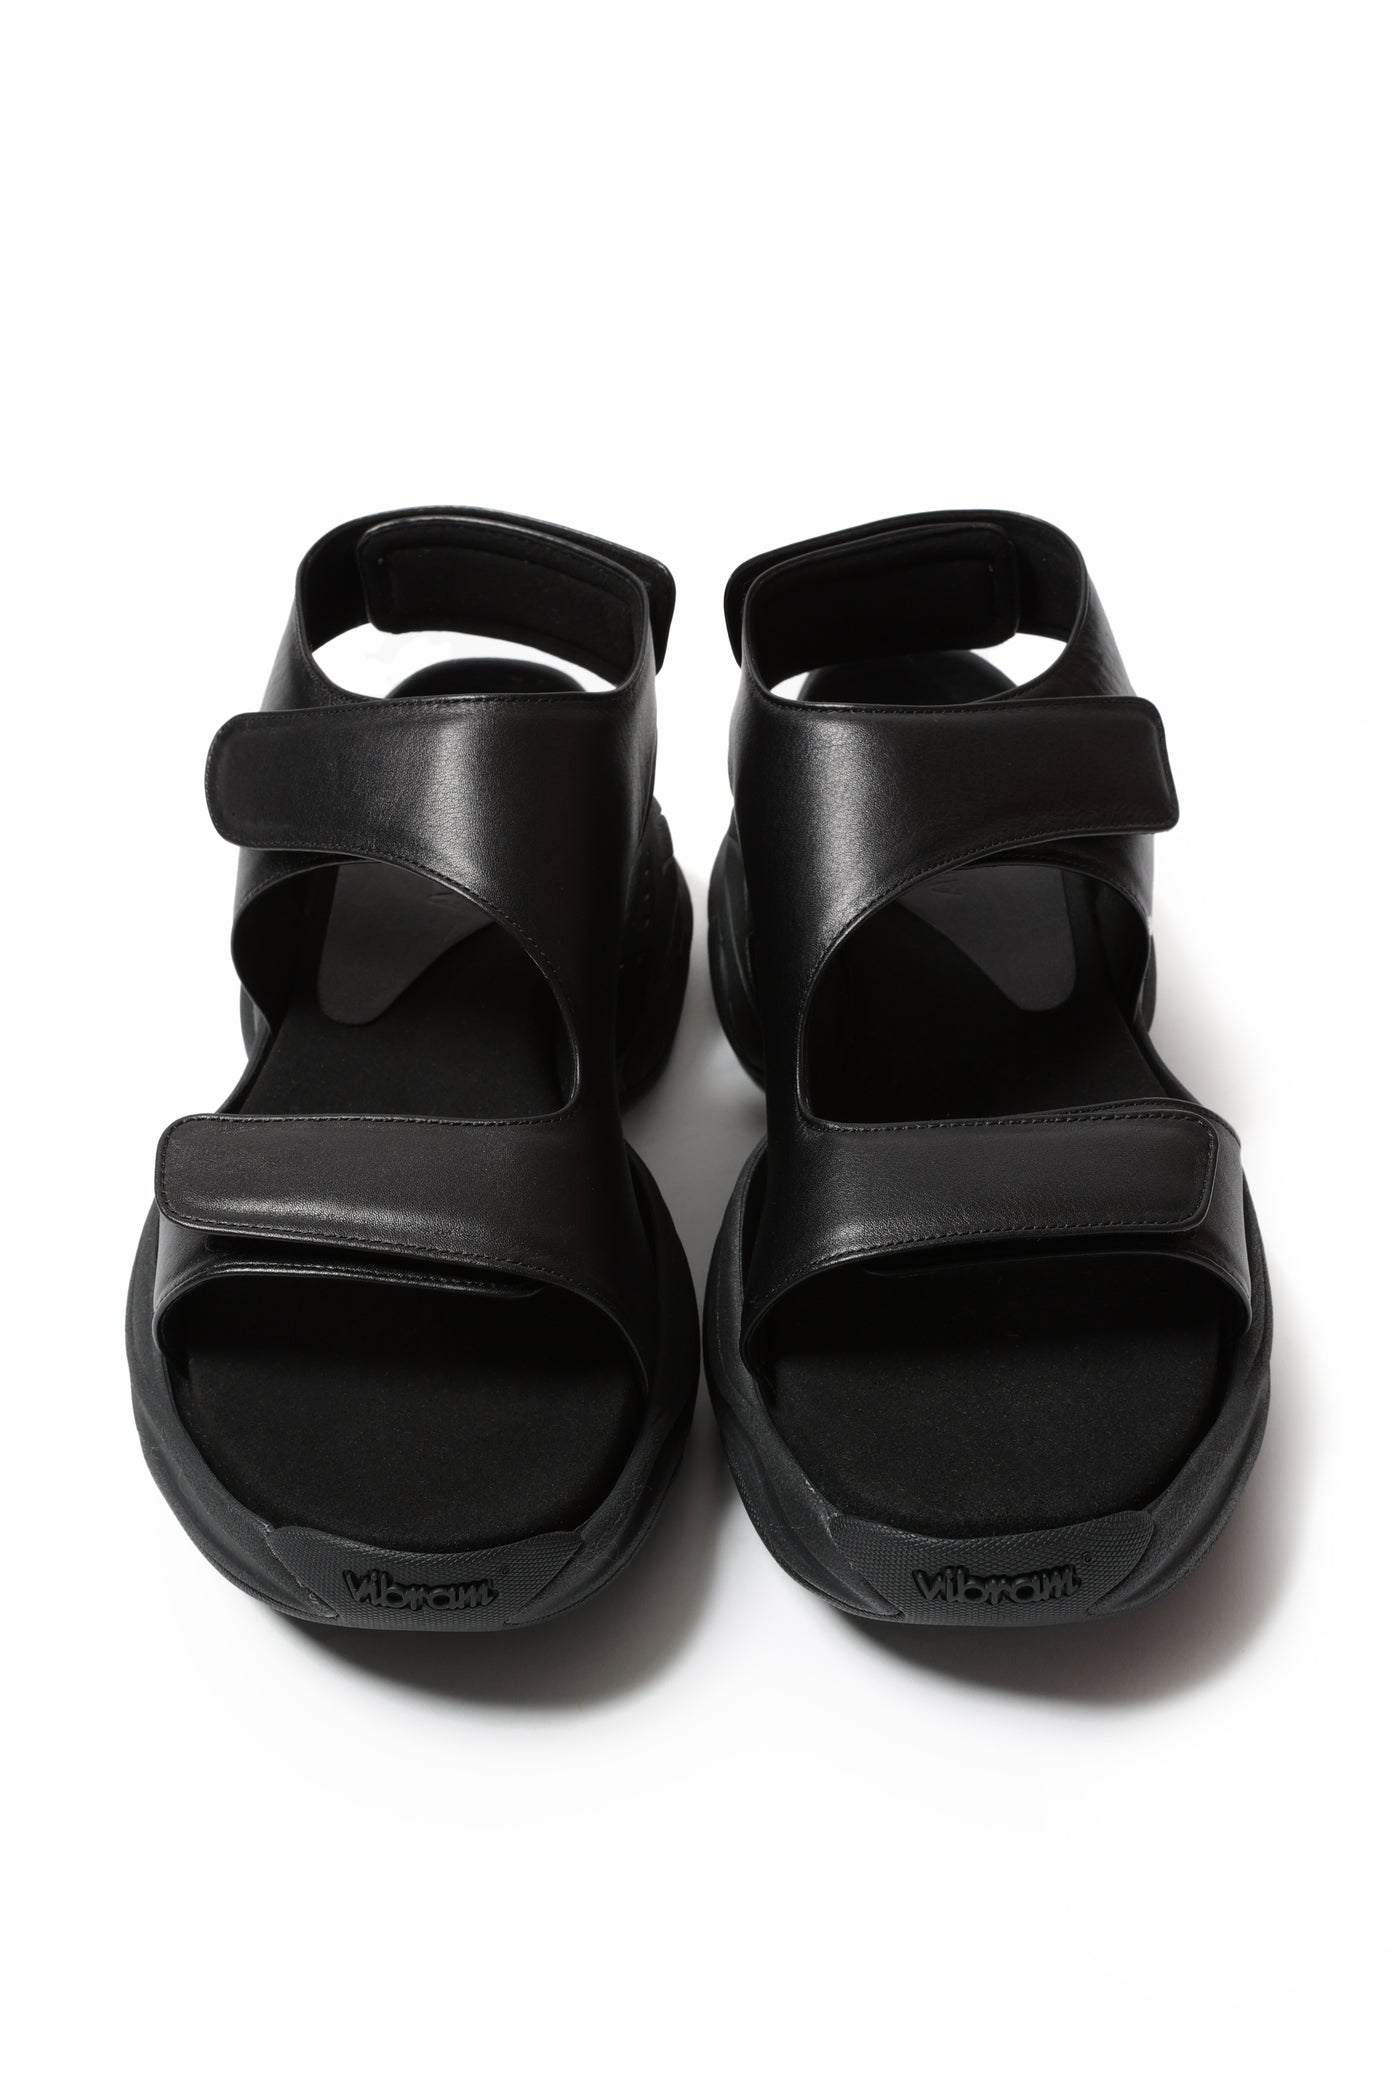 Released in February AA41-002 Calf leather sandals